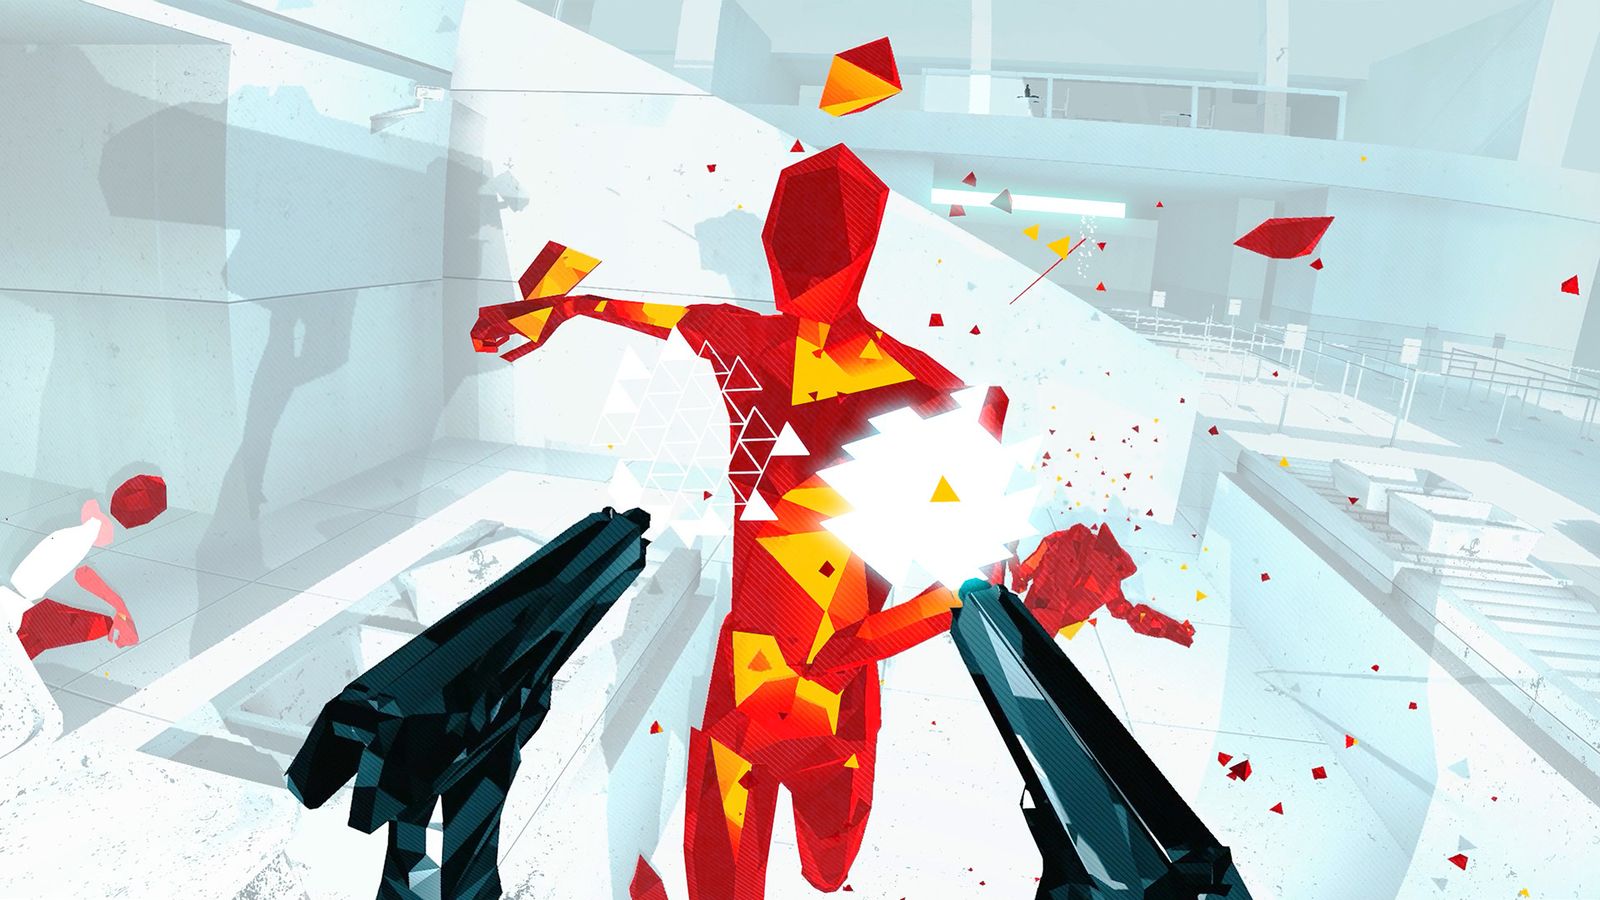 A first person image of someone holding two black guns firing them at a red blocky character.